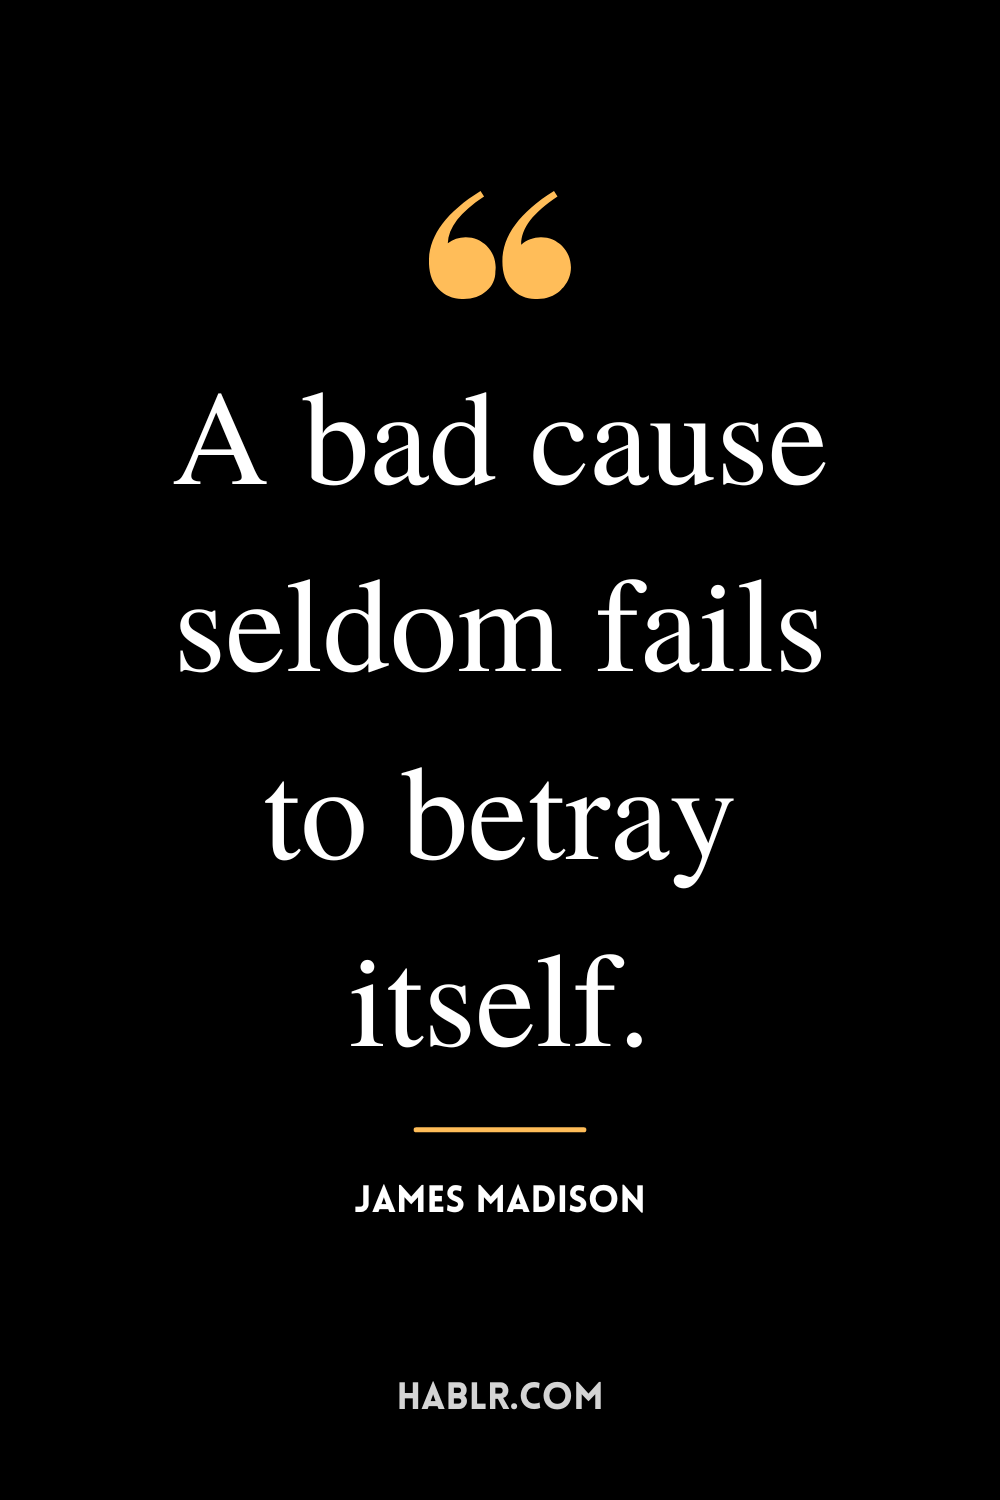 “A bad cause seldom fails to betray itself.” -James Madison